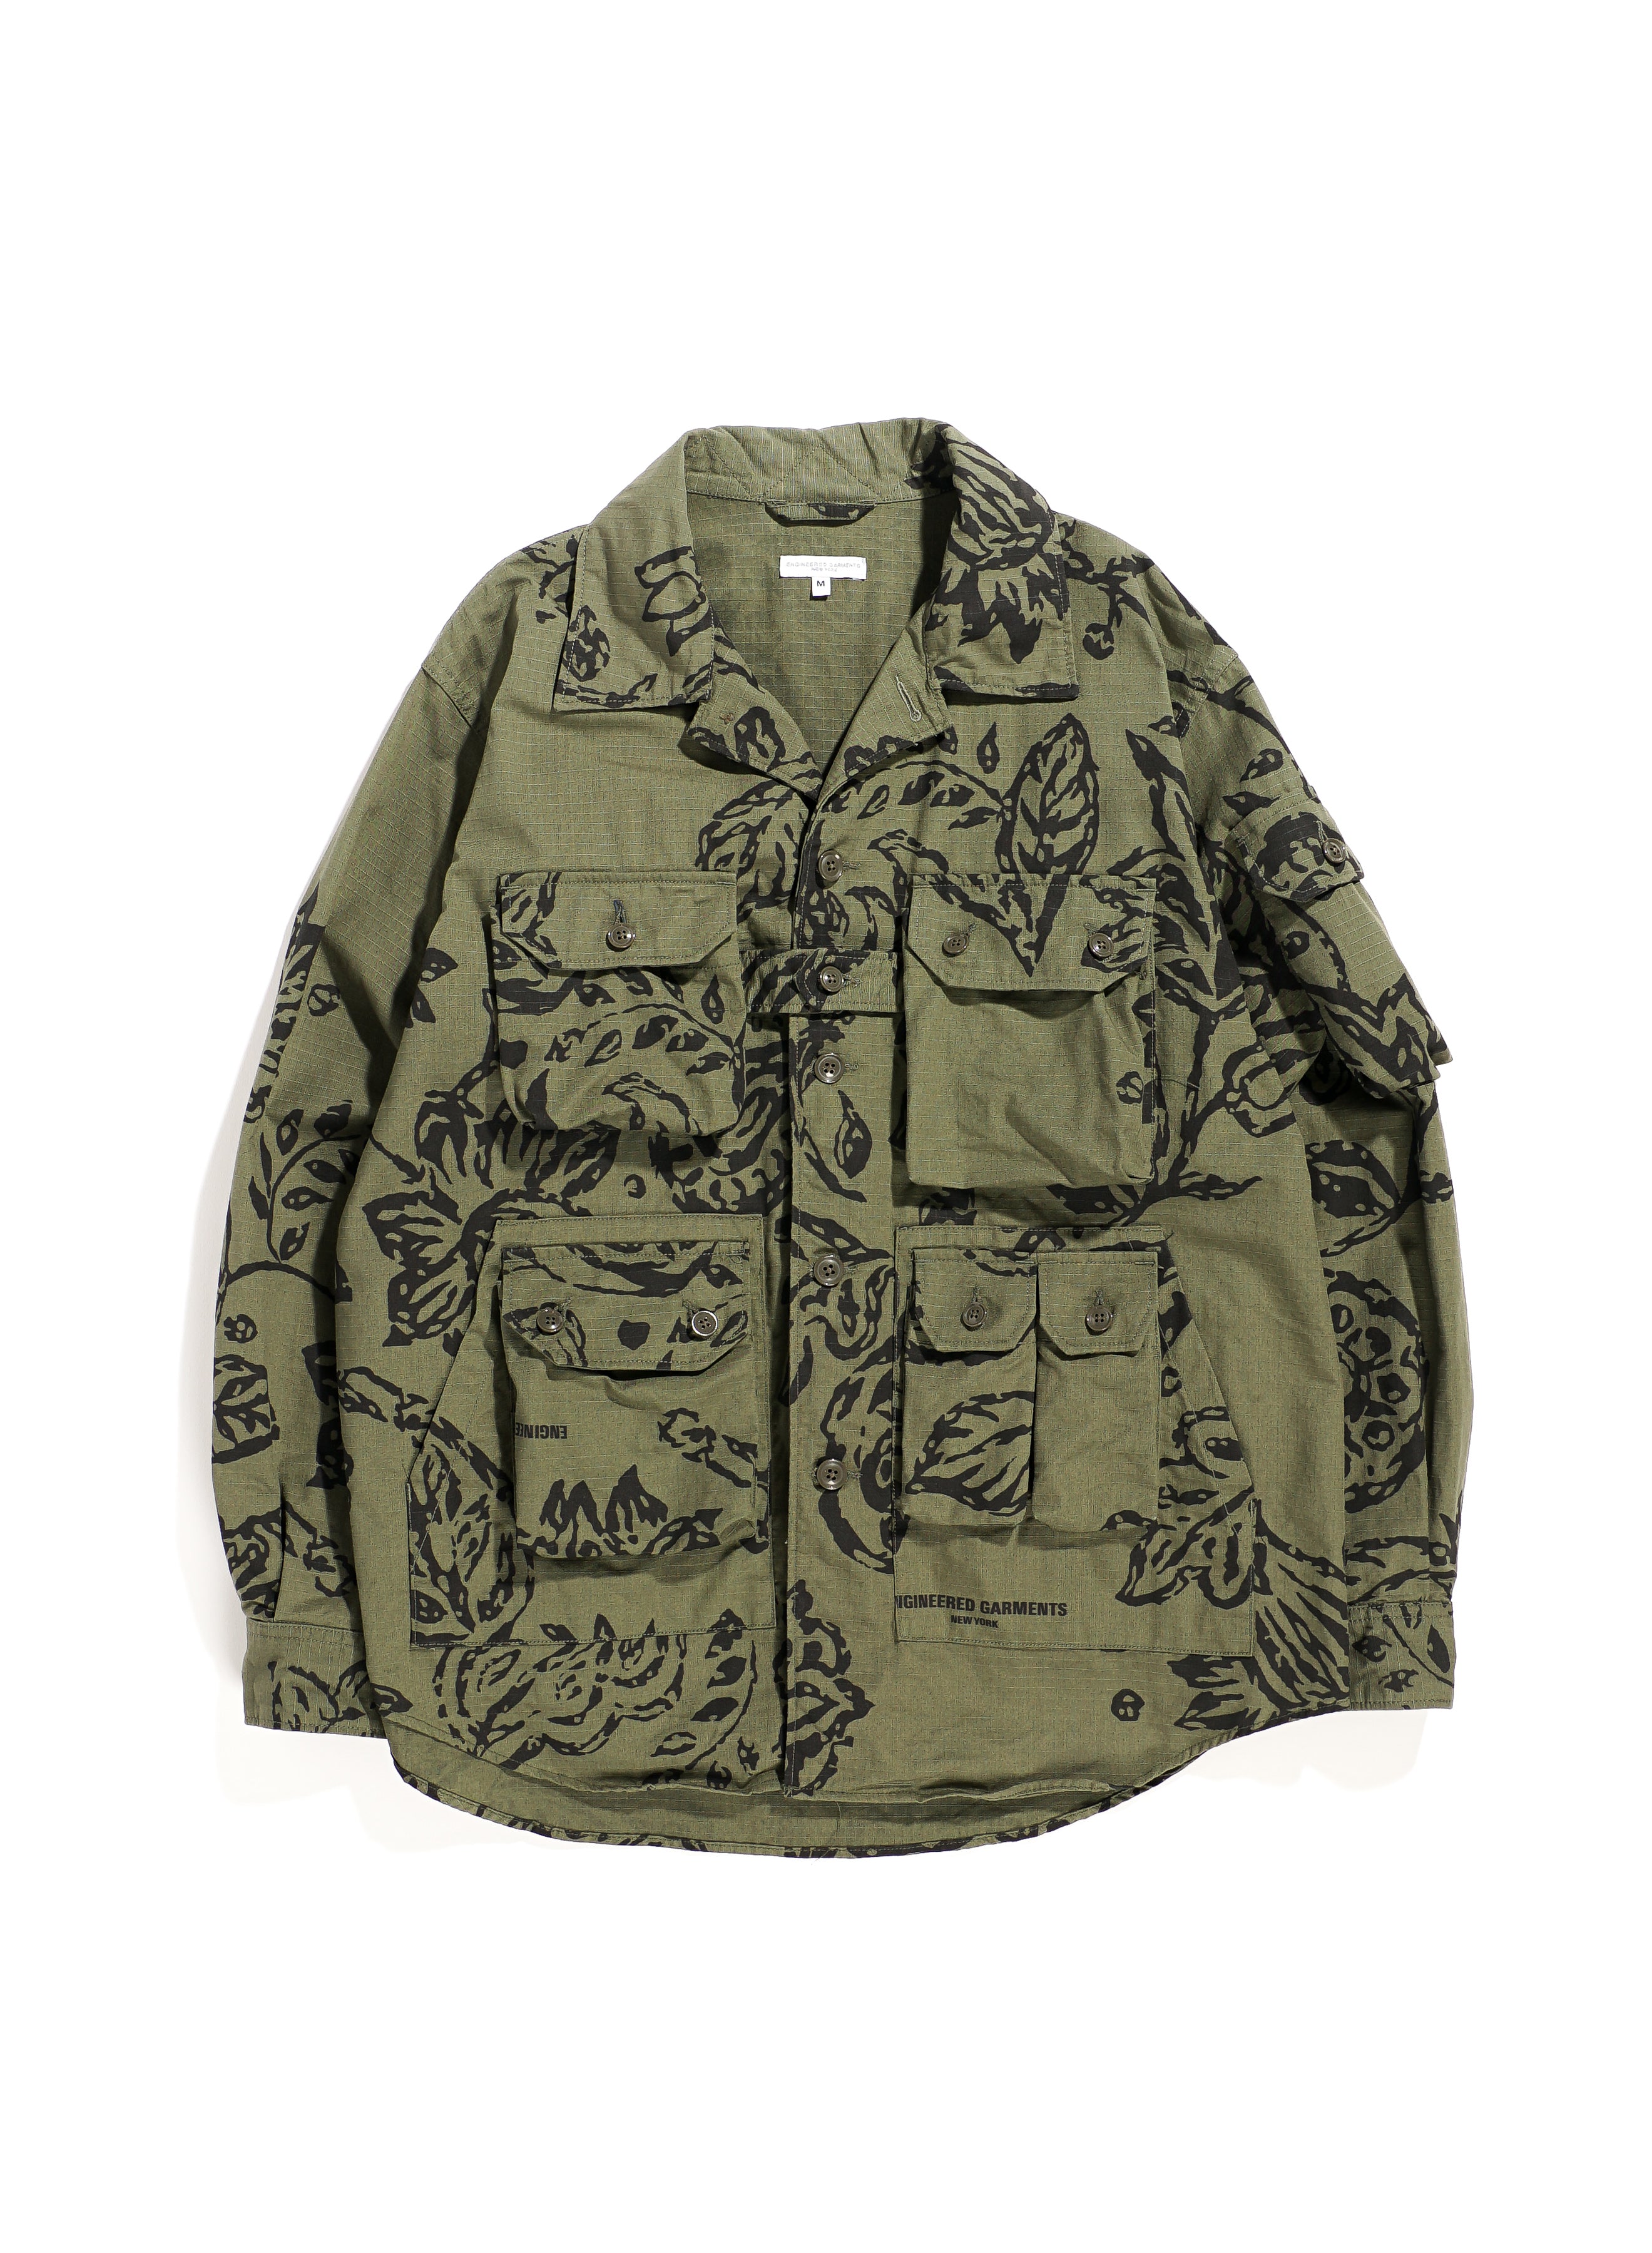 Explorer Shirt Jacket - Olive Floral Print Ripstop | Nepenthes New